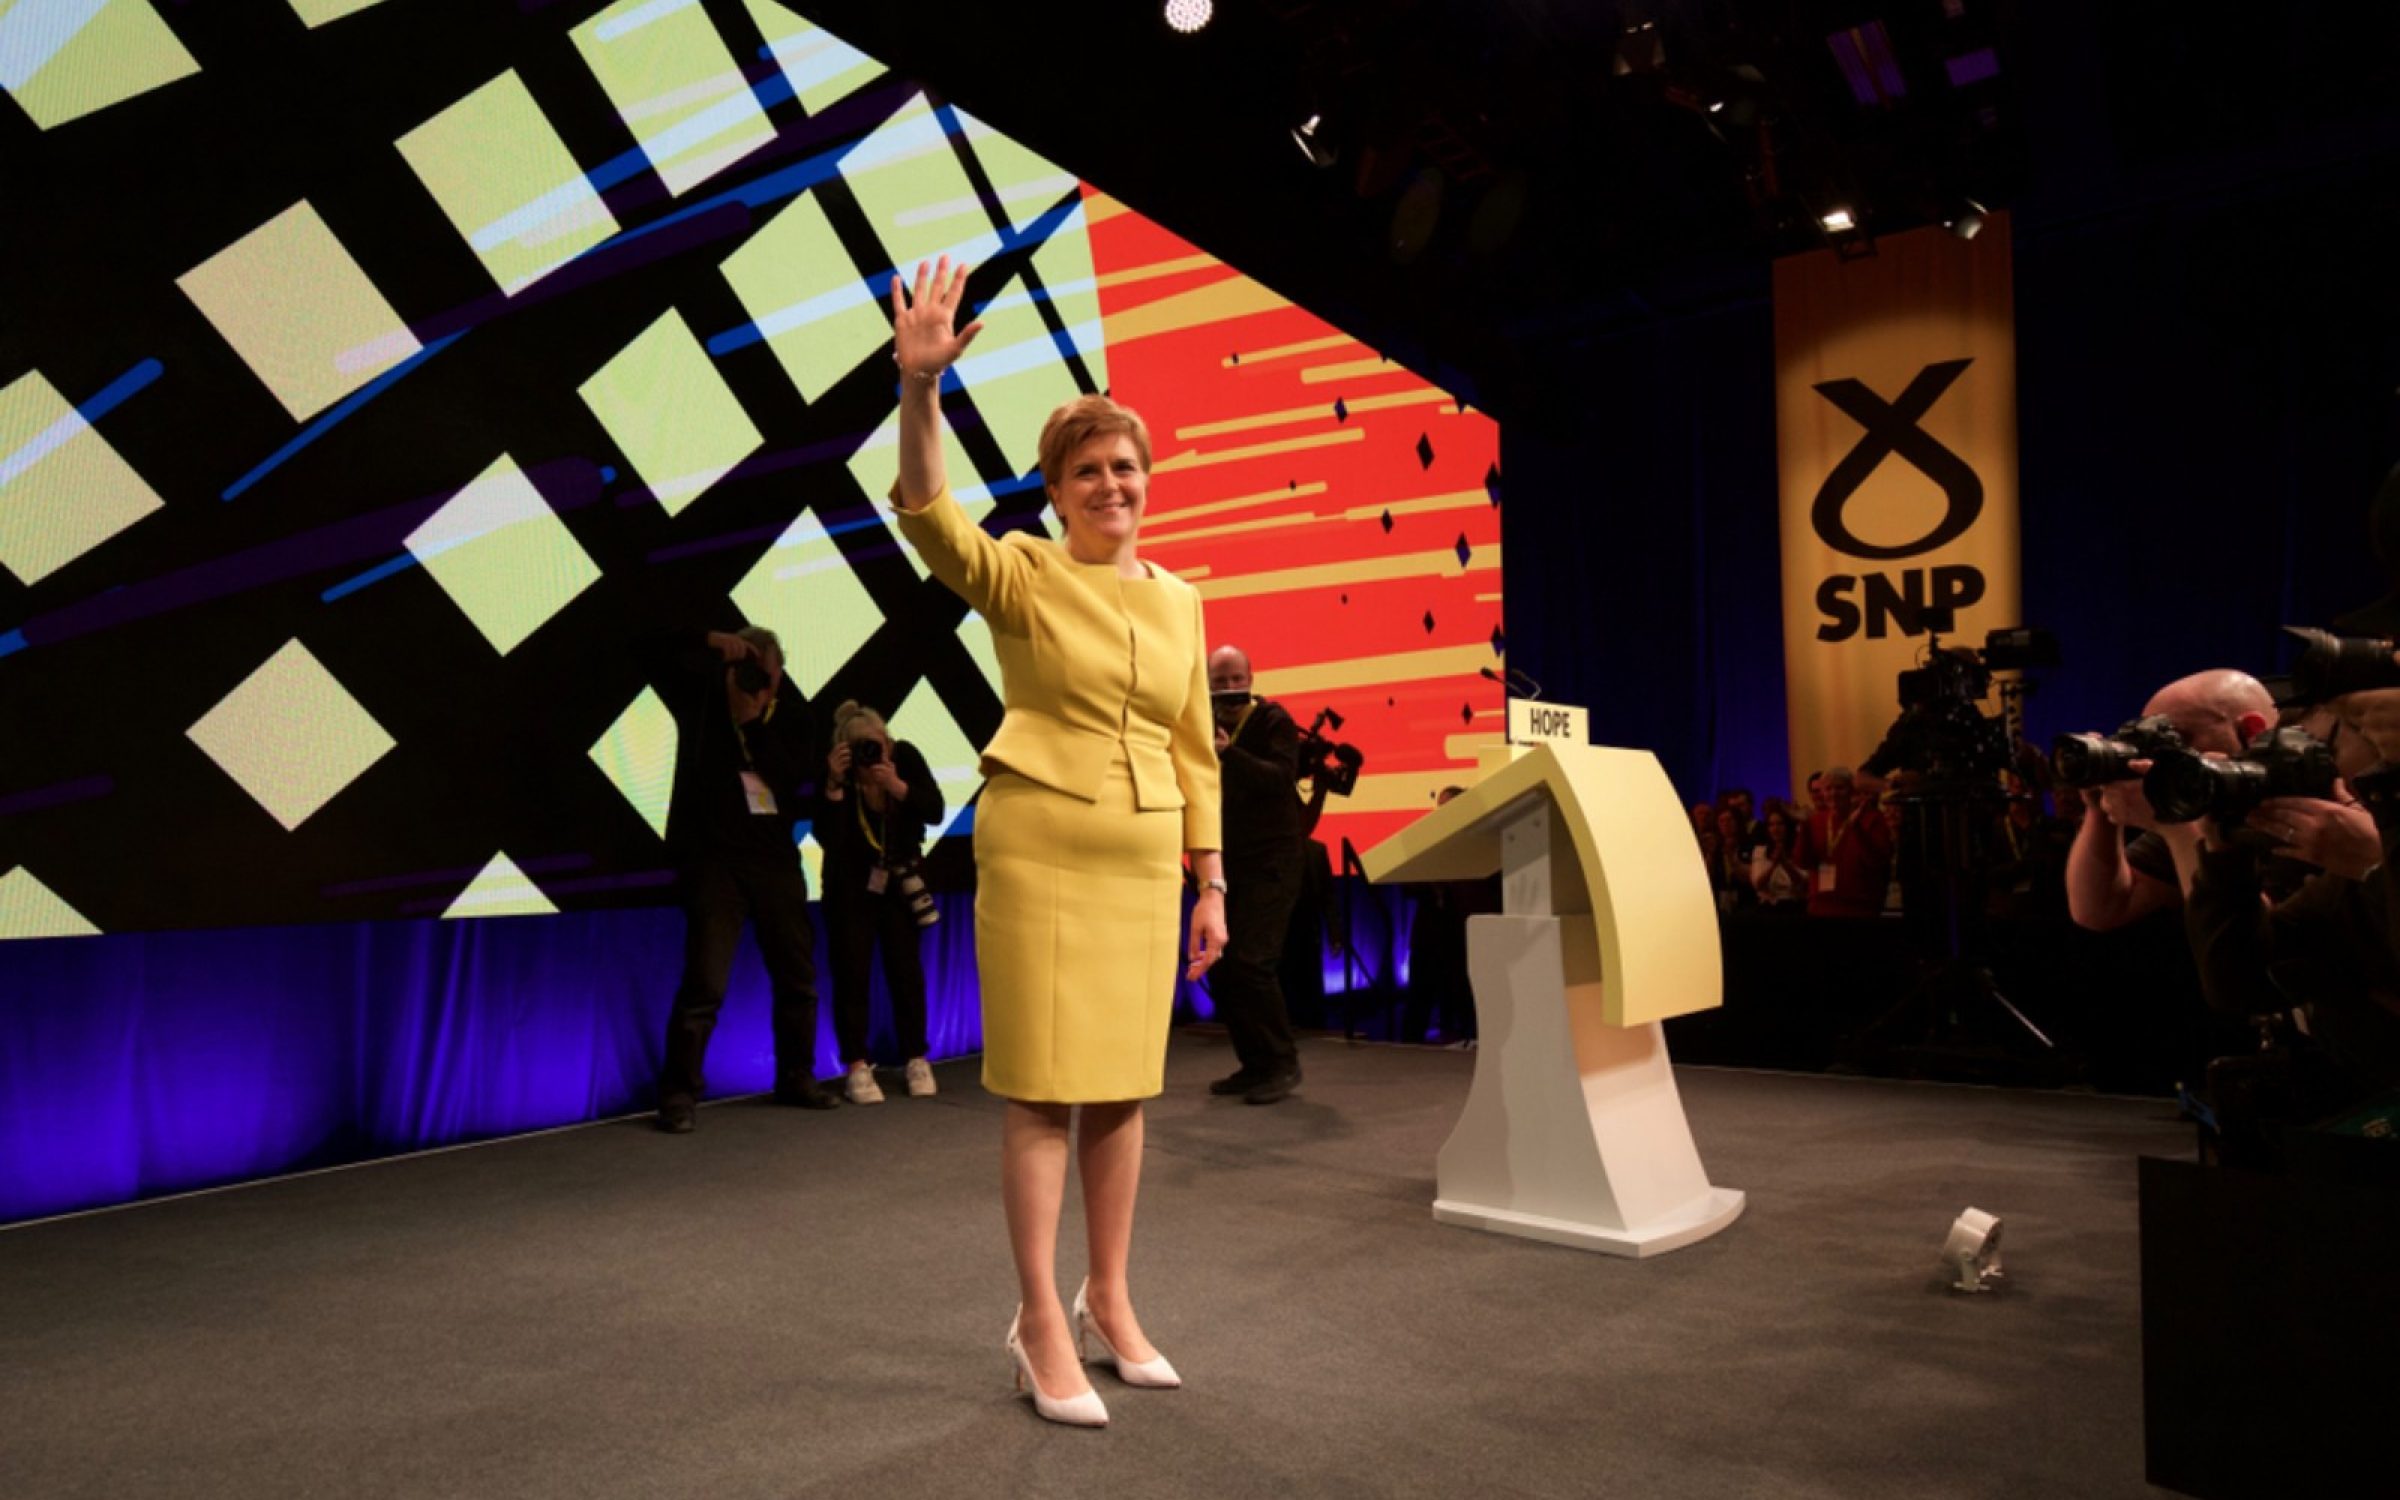 EDINBURGH,UK - April 28, 2019: Nicola Sturgeon, leader of the Scottish National Party, acknowledging party delegates following her speech to the SNP spring conference